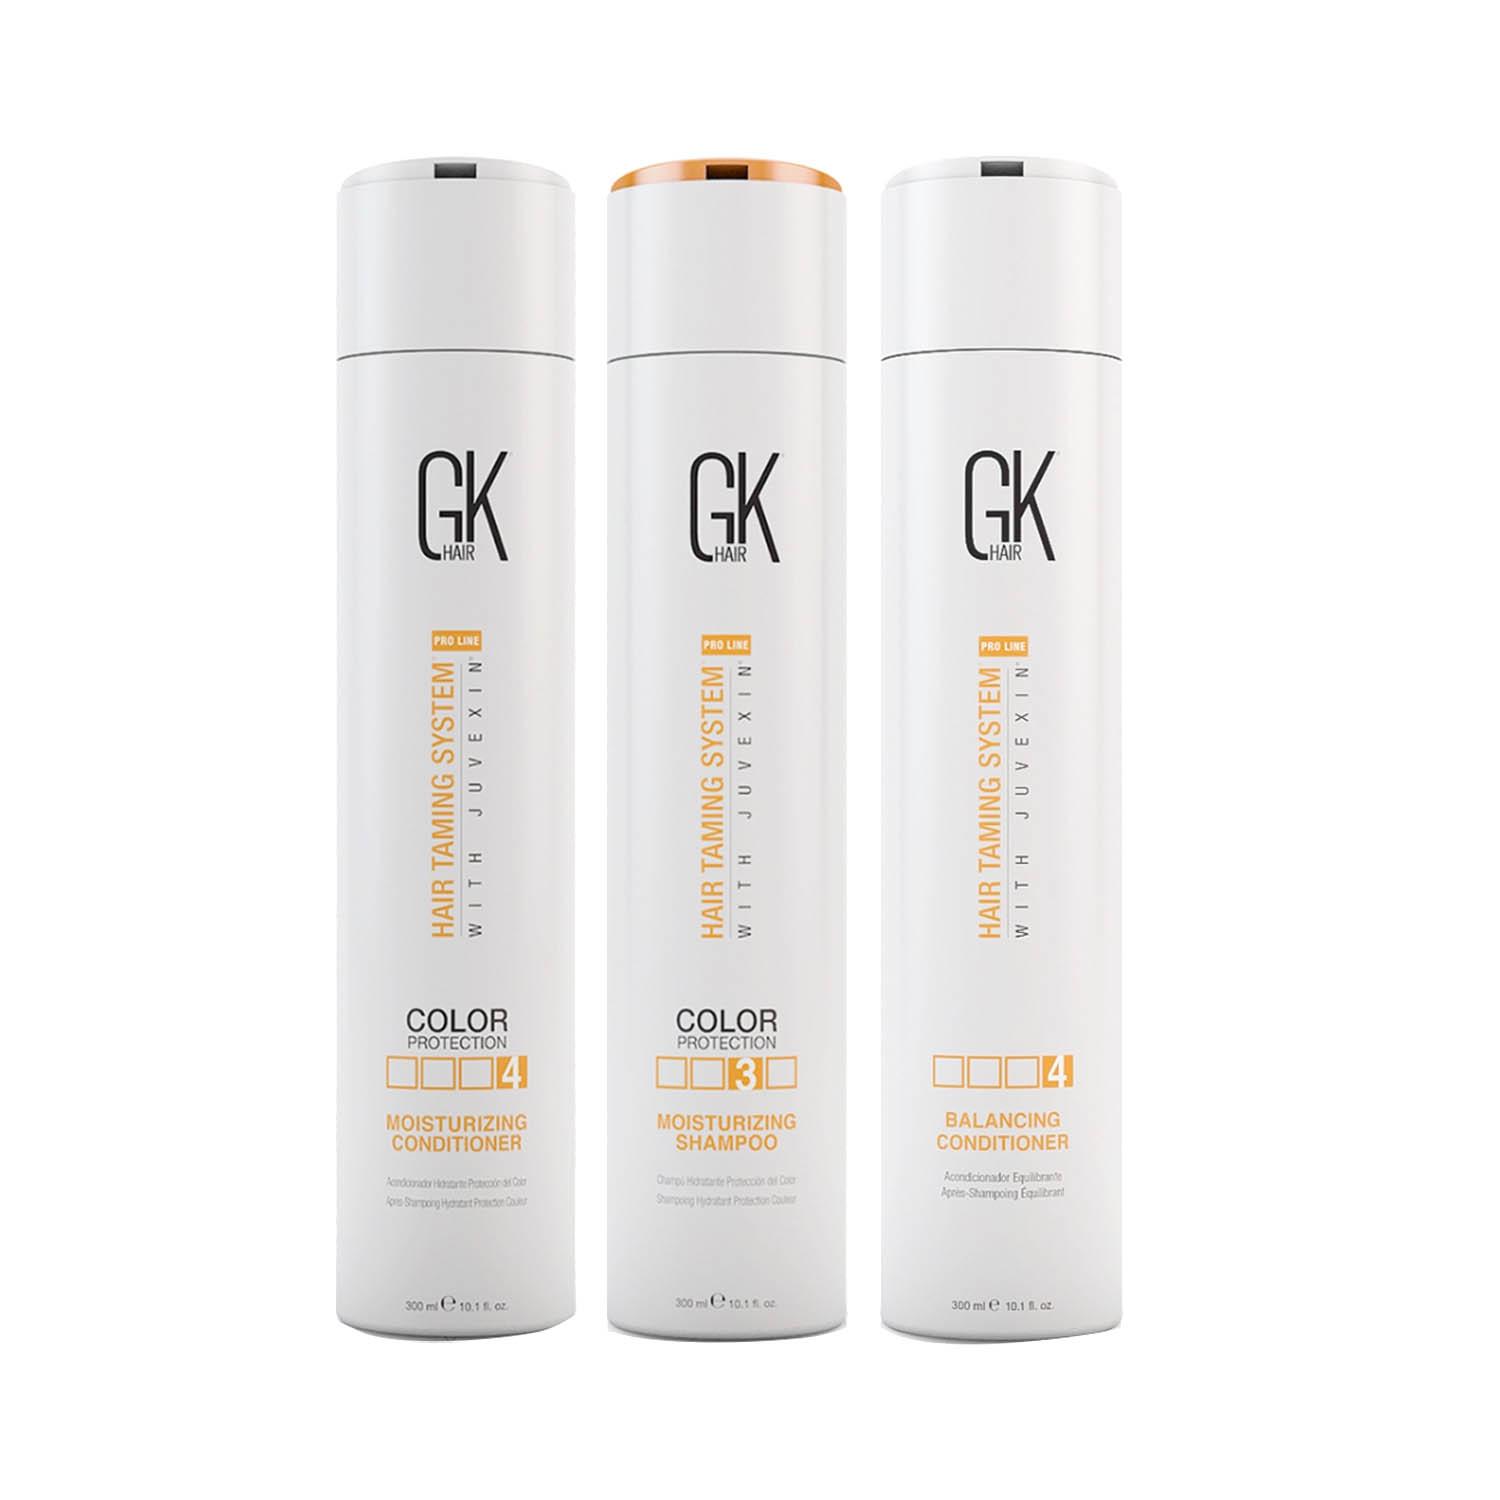 GK Hair | GK Hair Moisturizing Shampoo and Conditioner 300ml with Balancing Conditioner 300ml